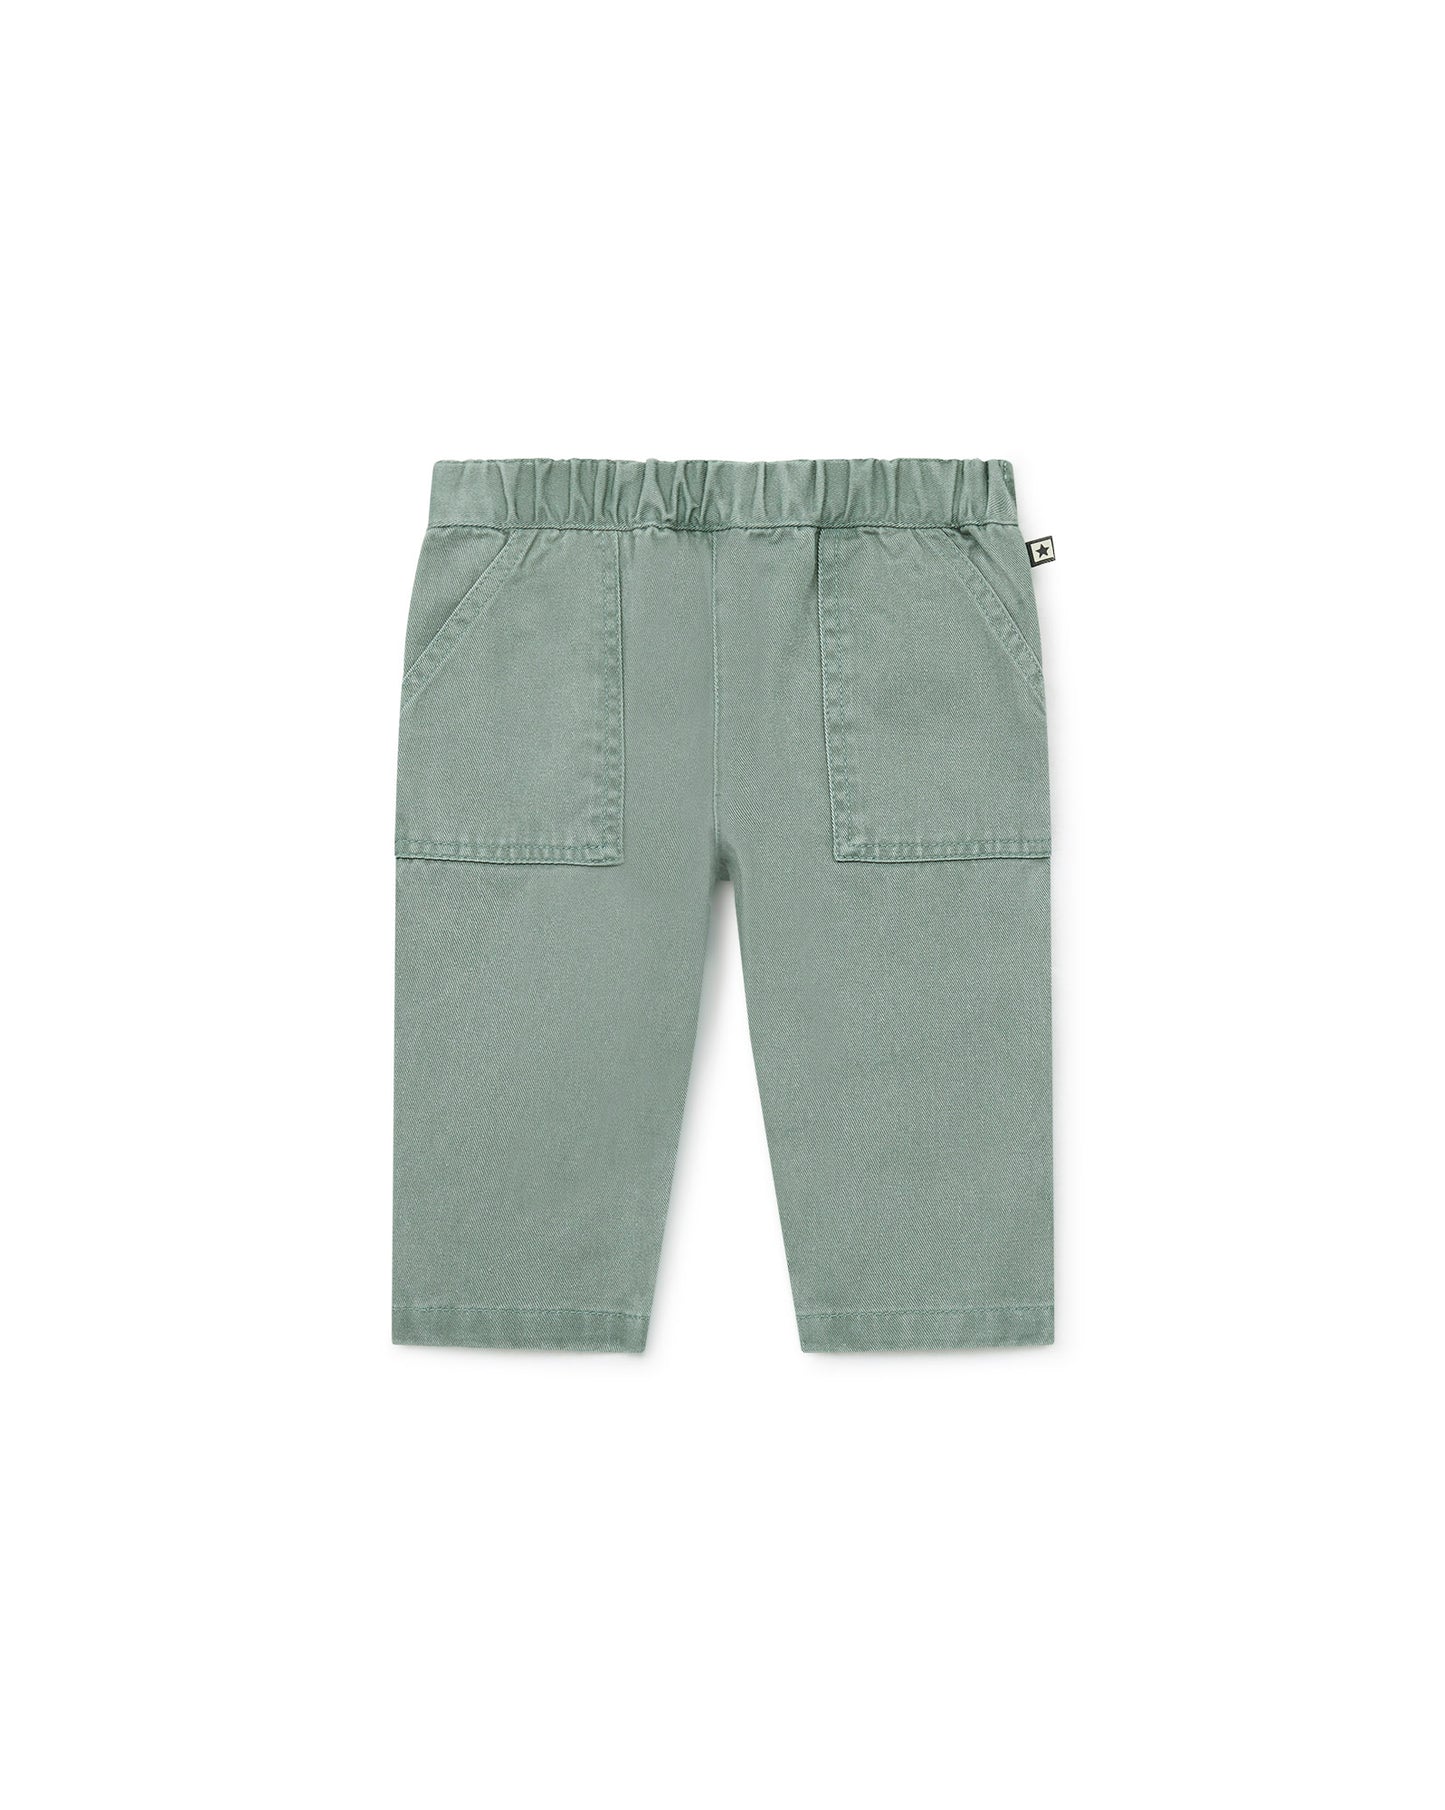 Trousers - Grey